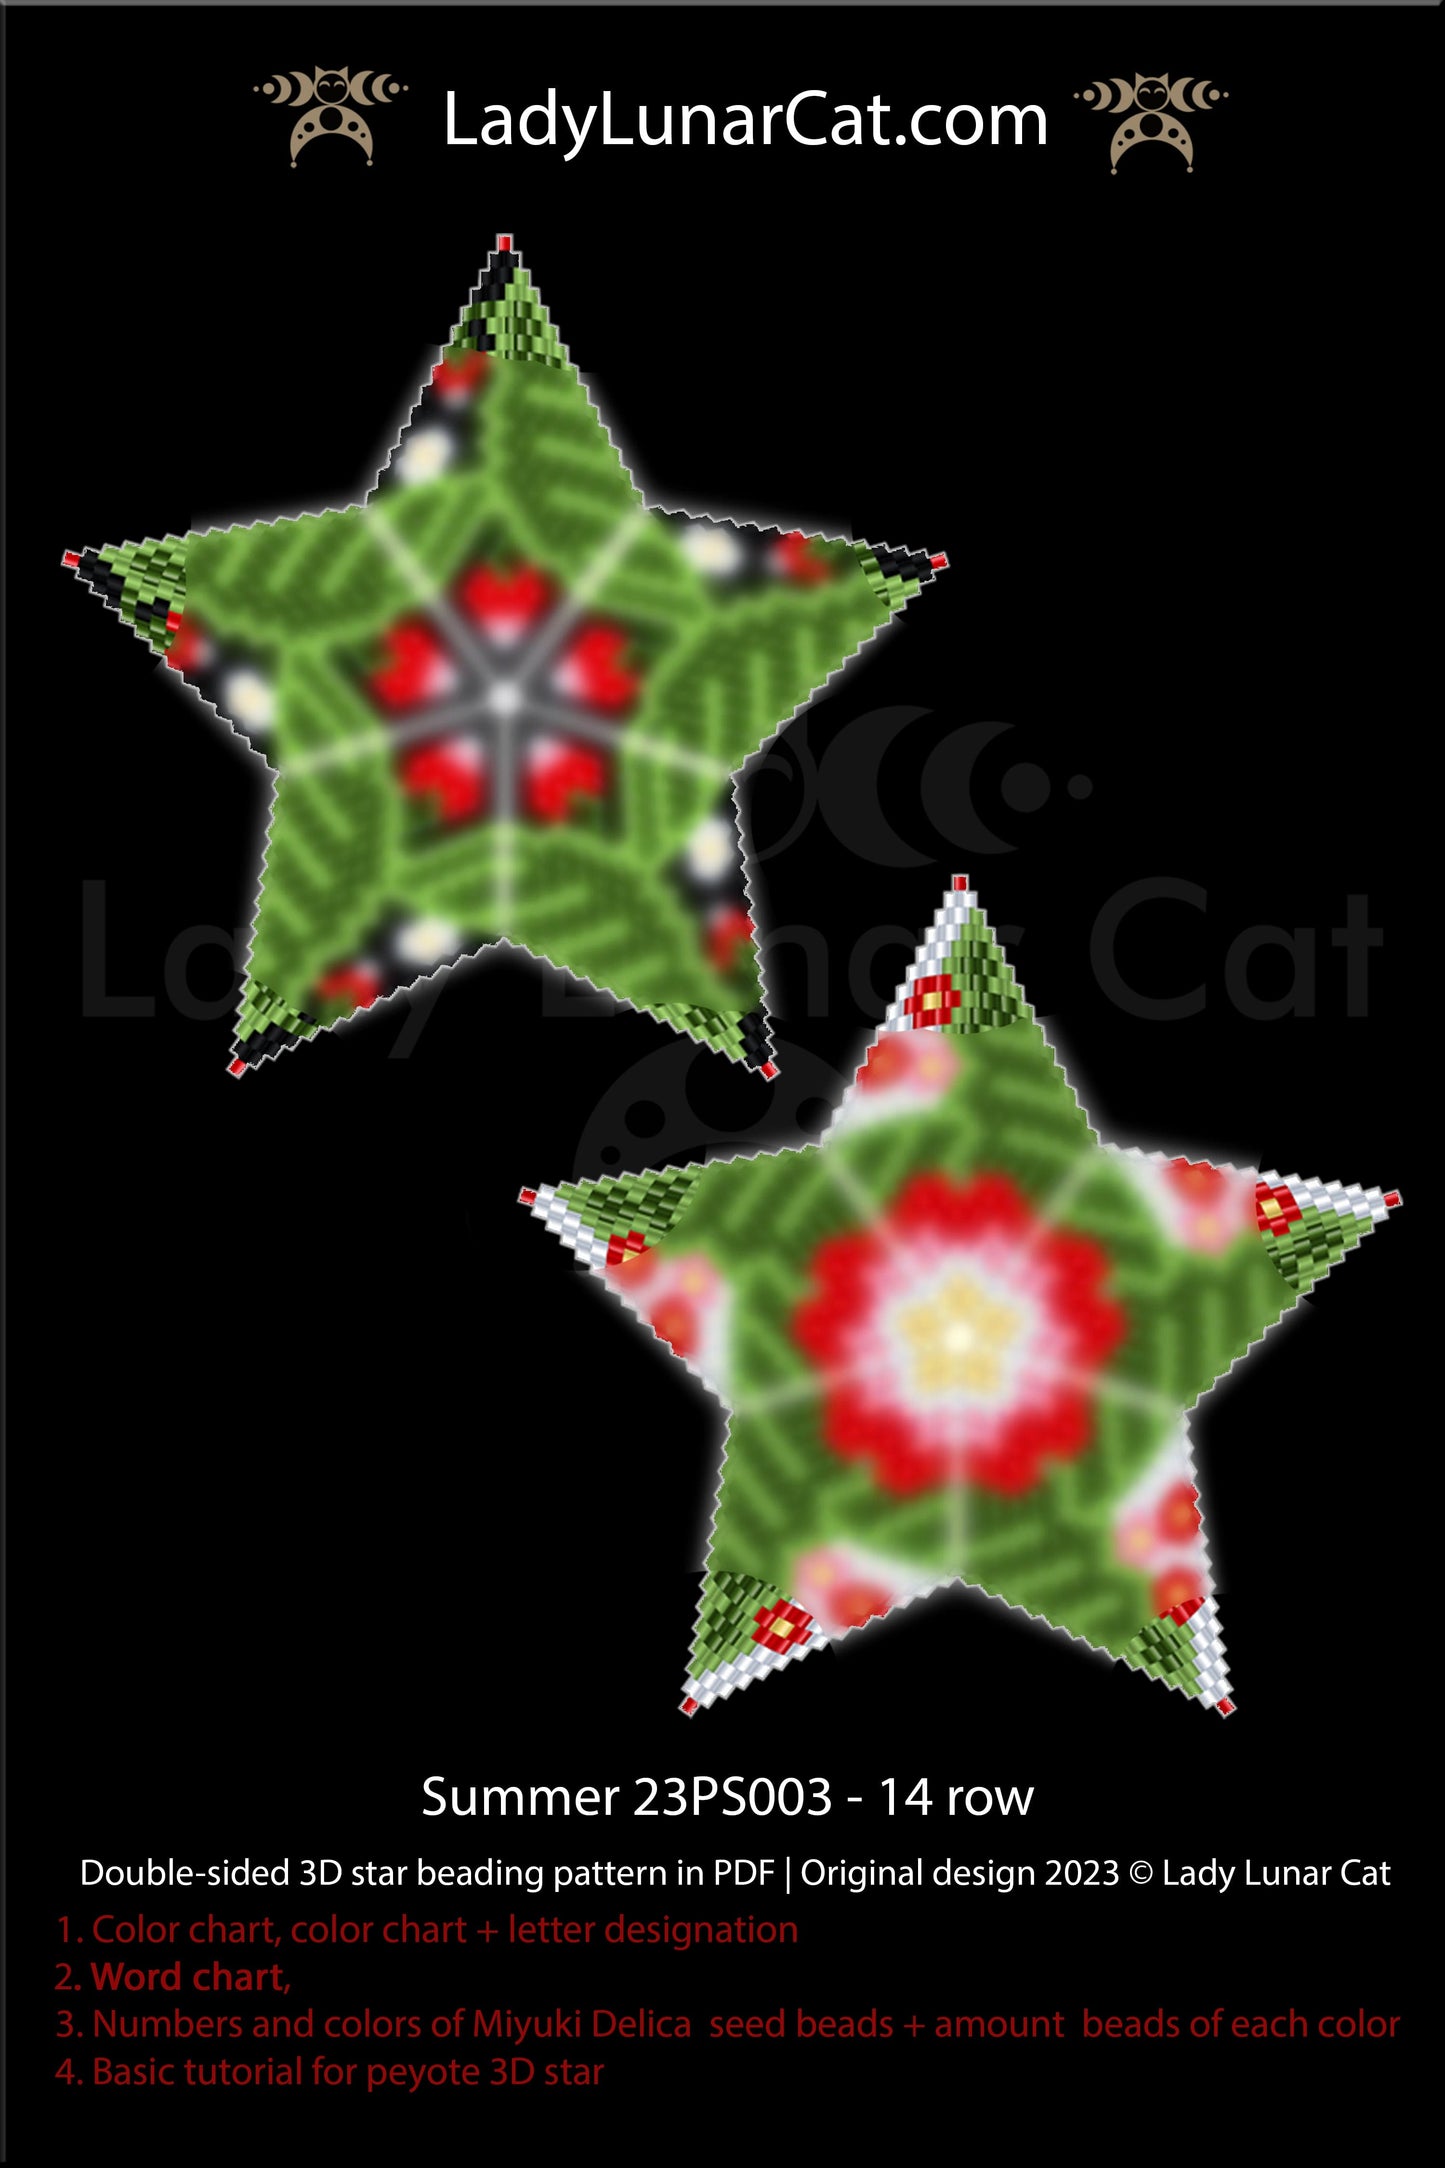 Copy of Peyote star pattern for beading - Violette 19PS005 15 rows LadyLunarCat